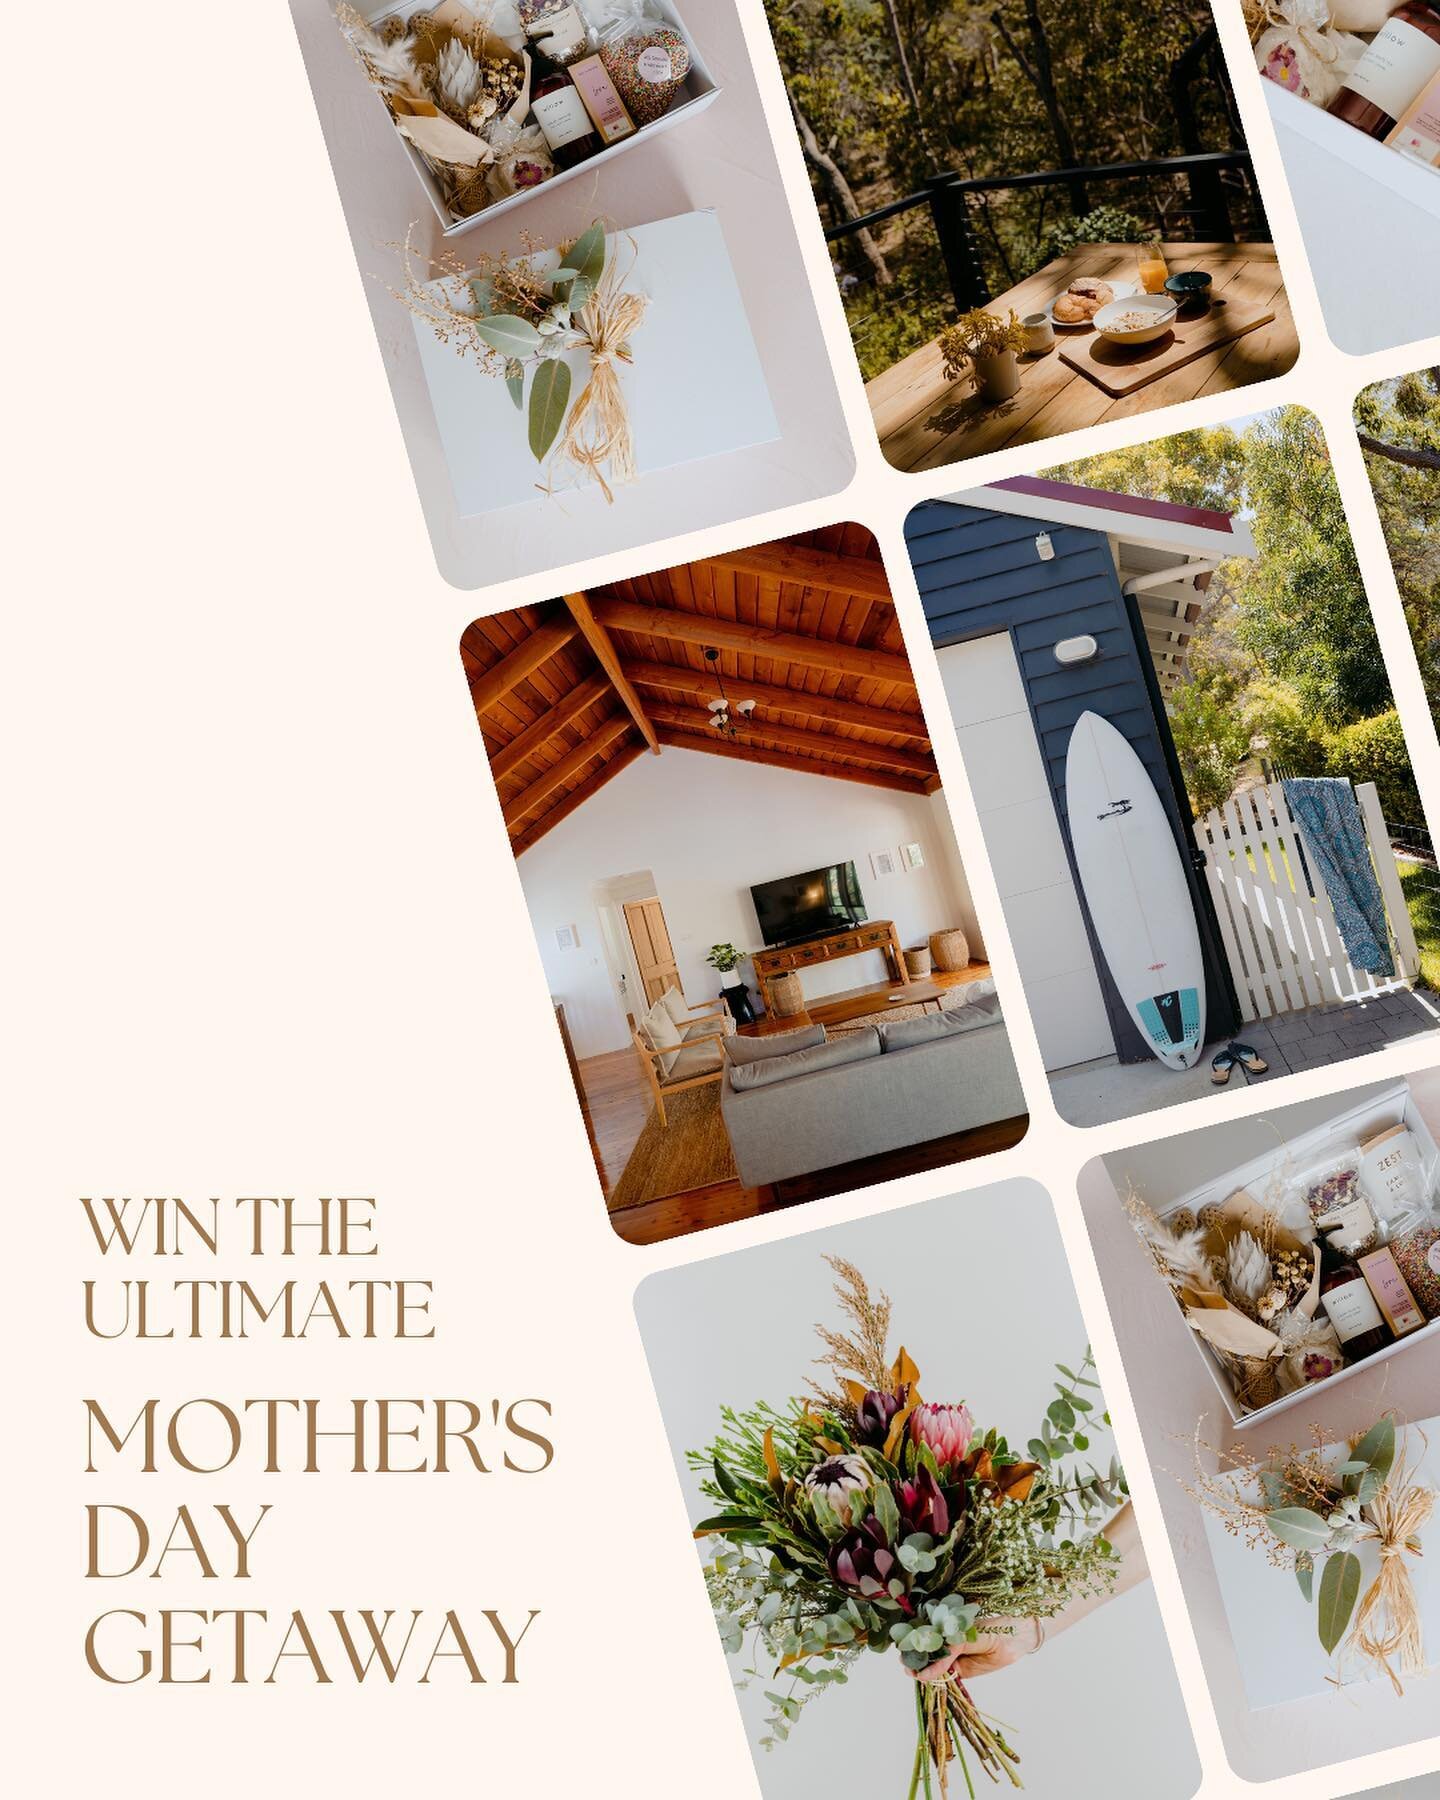 We understand how important it is for Mothers to get quality time away.

That&rsquo;s why we&rsquo;ve teamed up with @zestflowers to give you the chance to win a weekend away in the South West for a deserving mum and let them be spoiled with gifts! 
